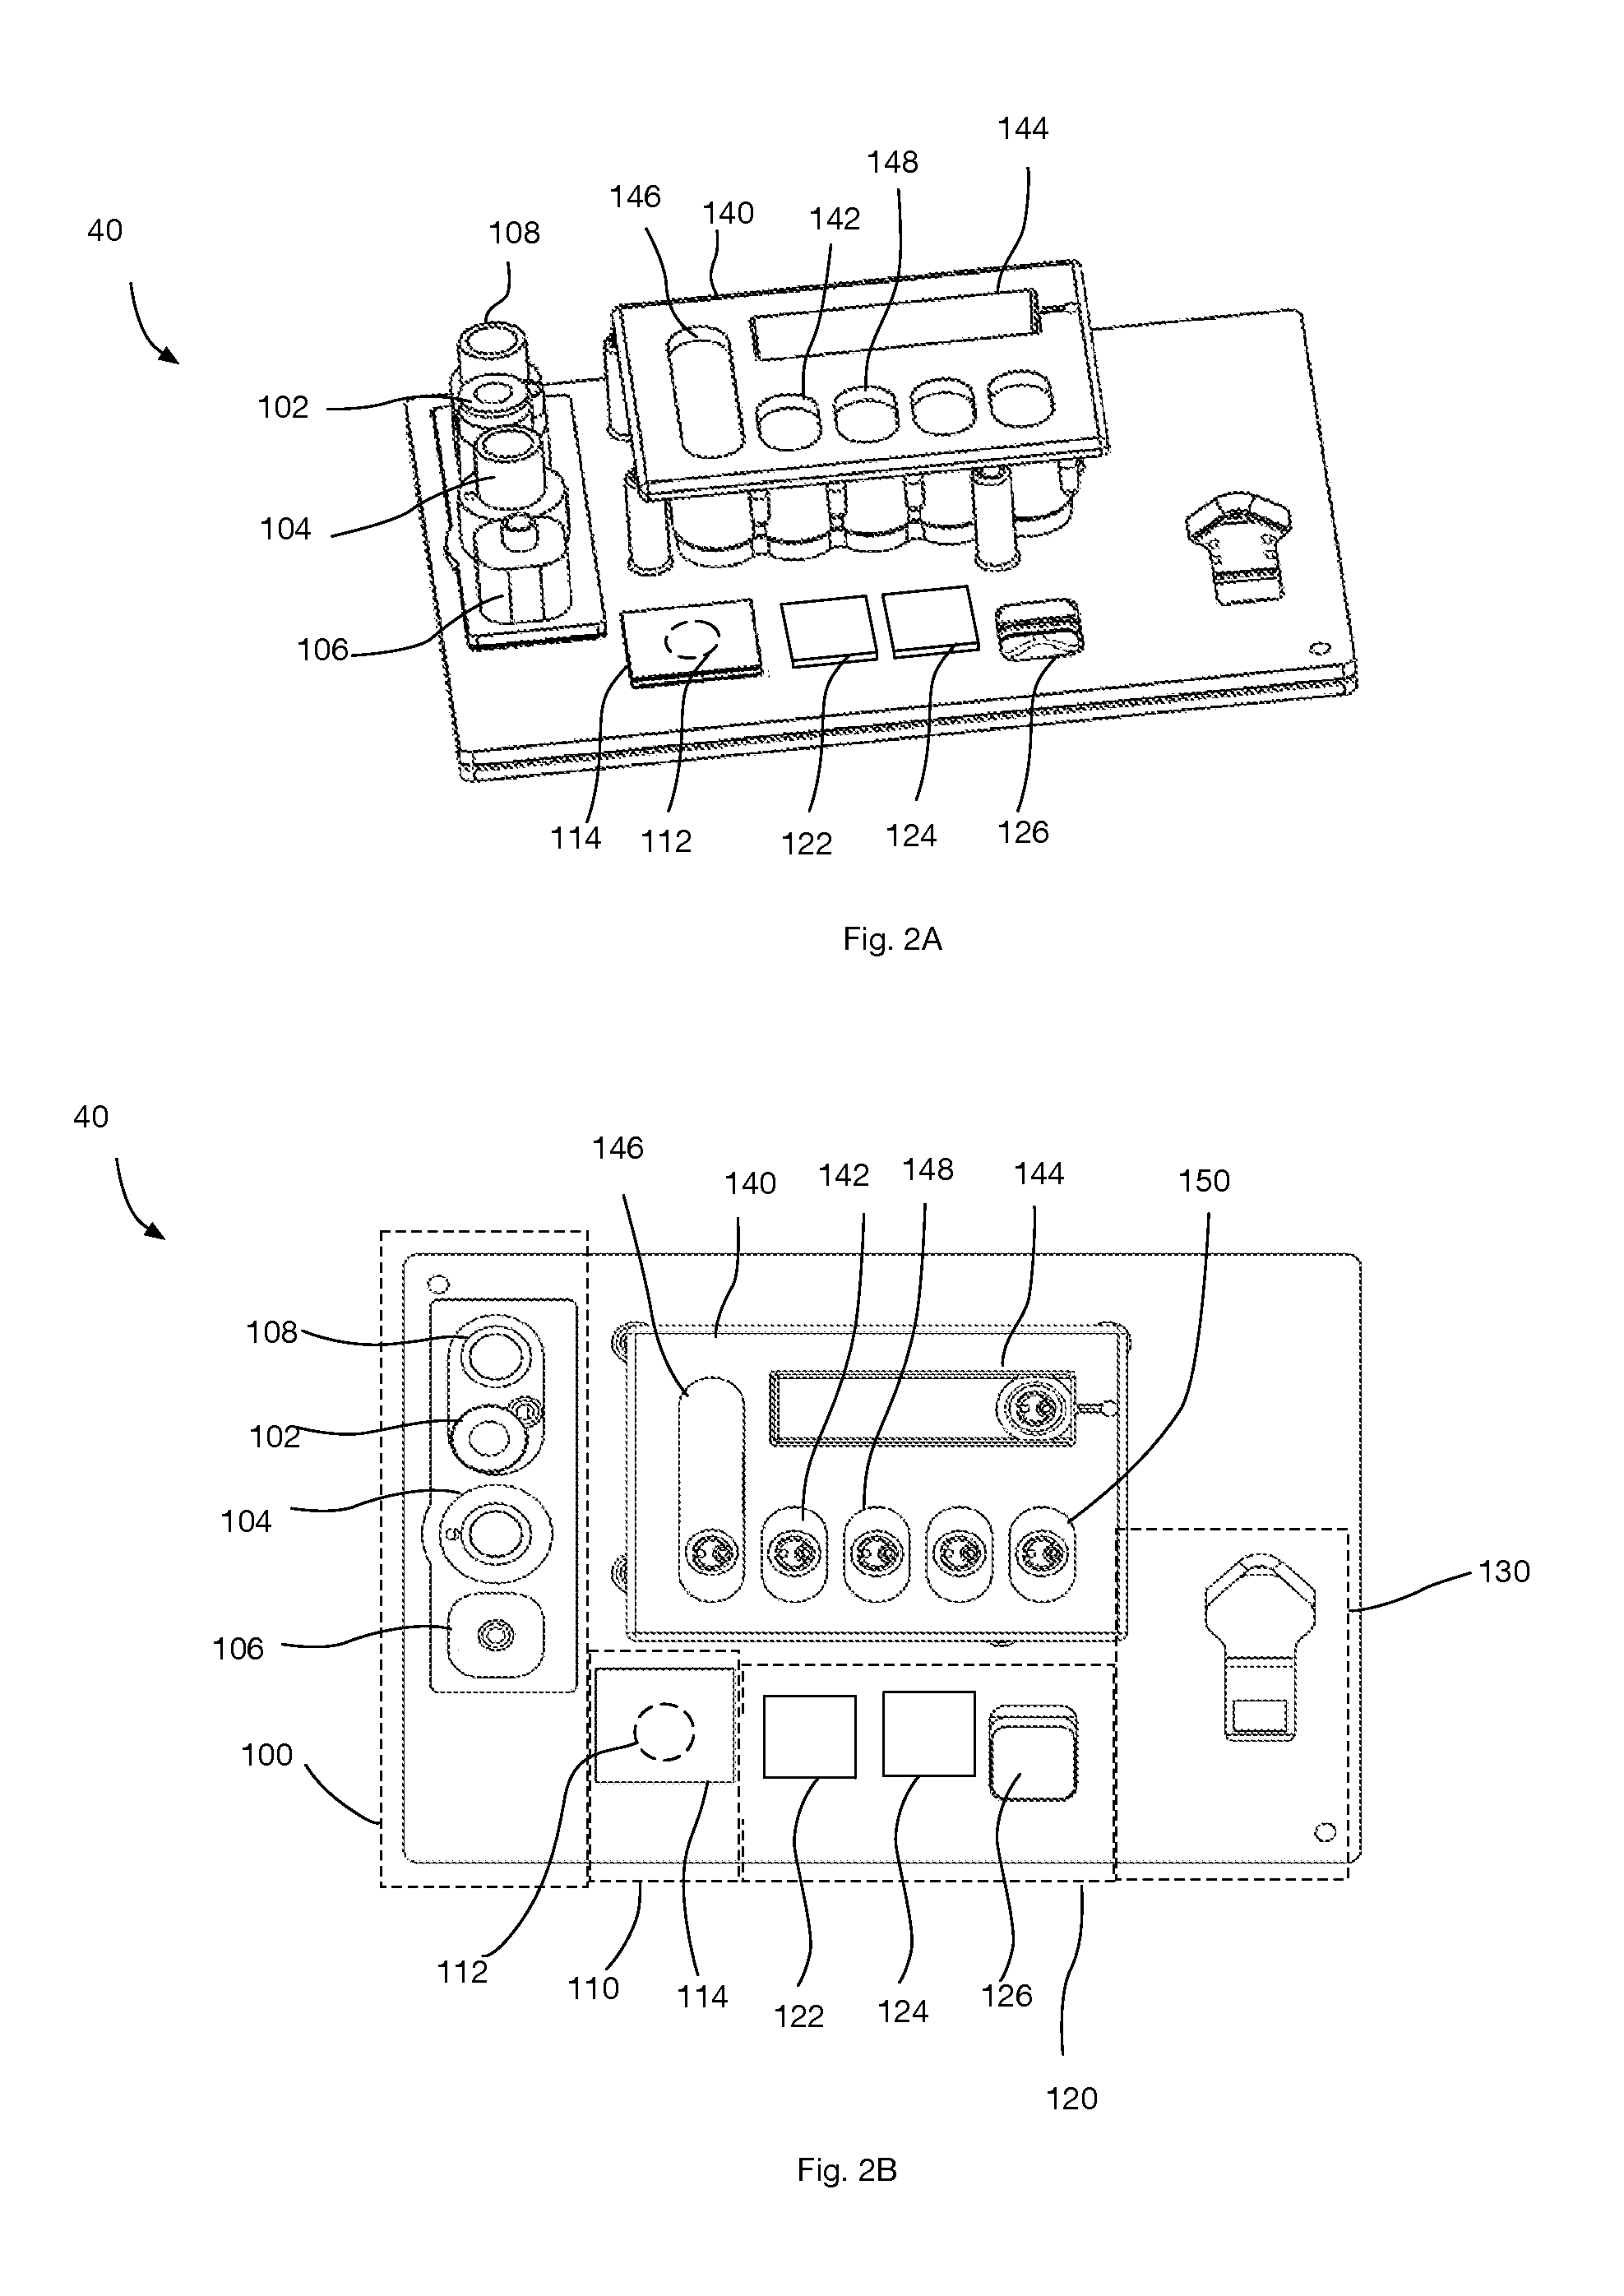 Portable nucleic acid analysis system and high-performance microfluidic electroactive polymer actuators